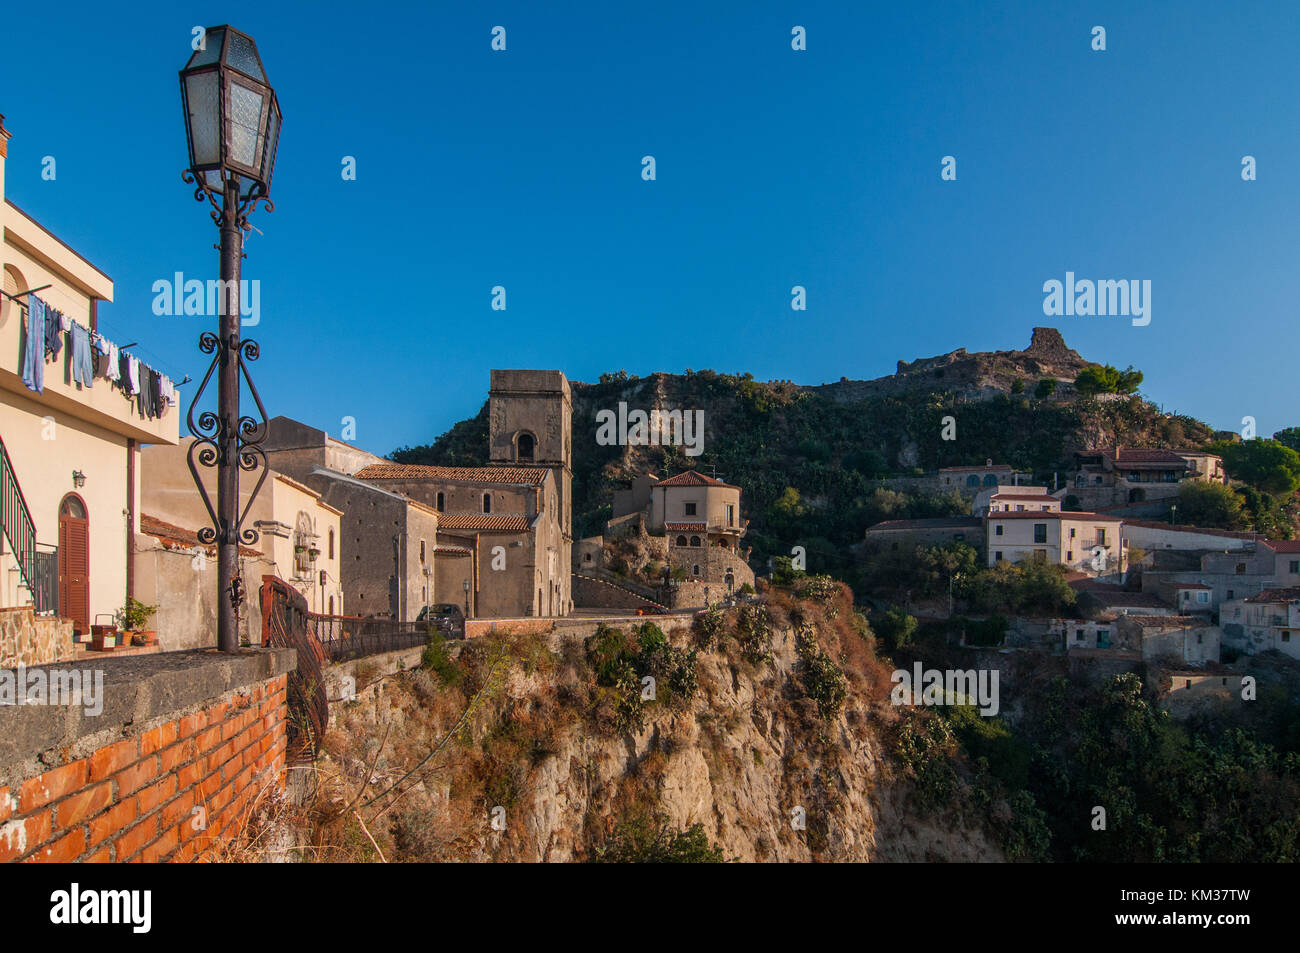 Page 2 Corleone Italy High Resolution Stock Photography And